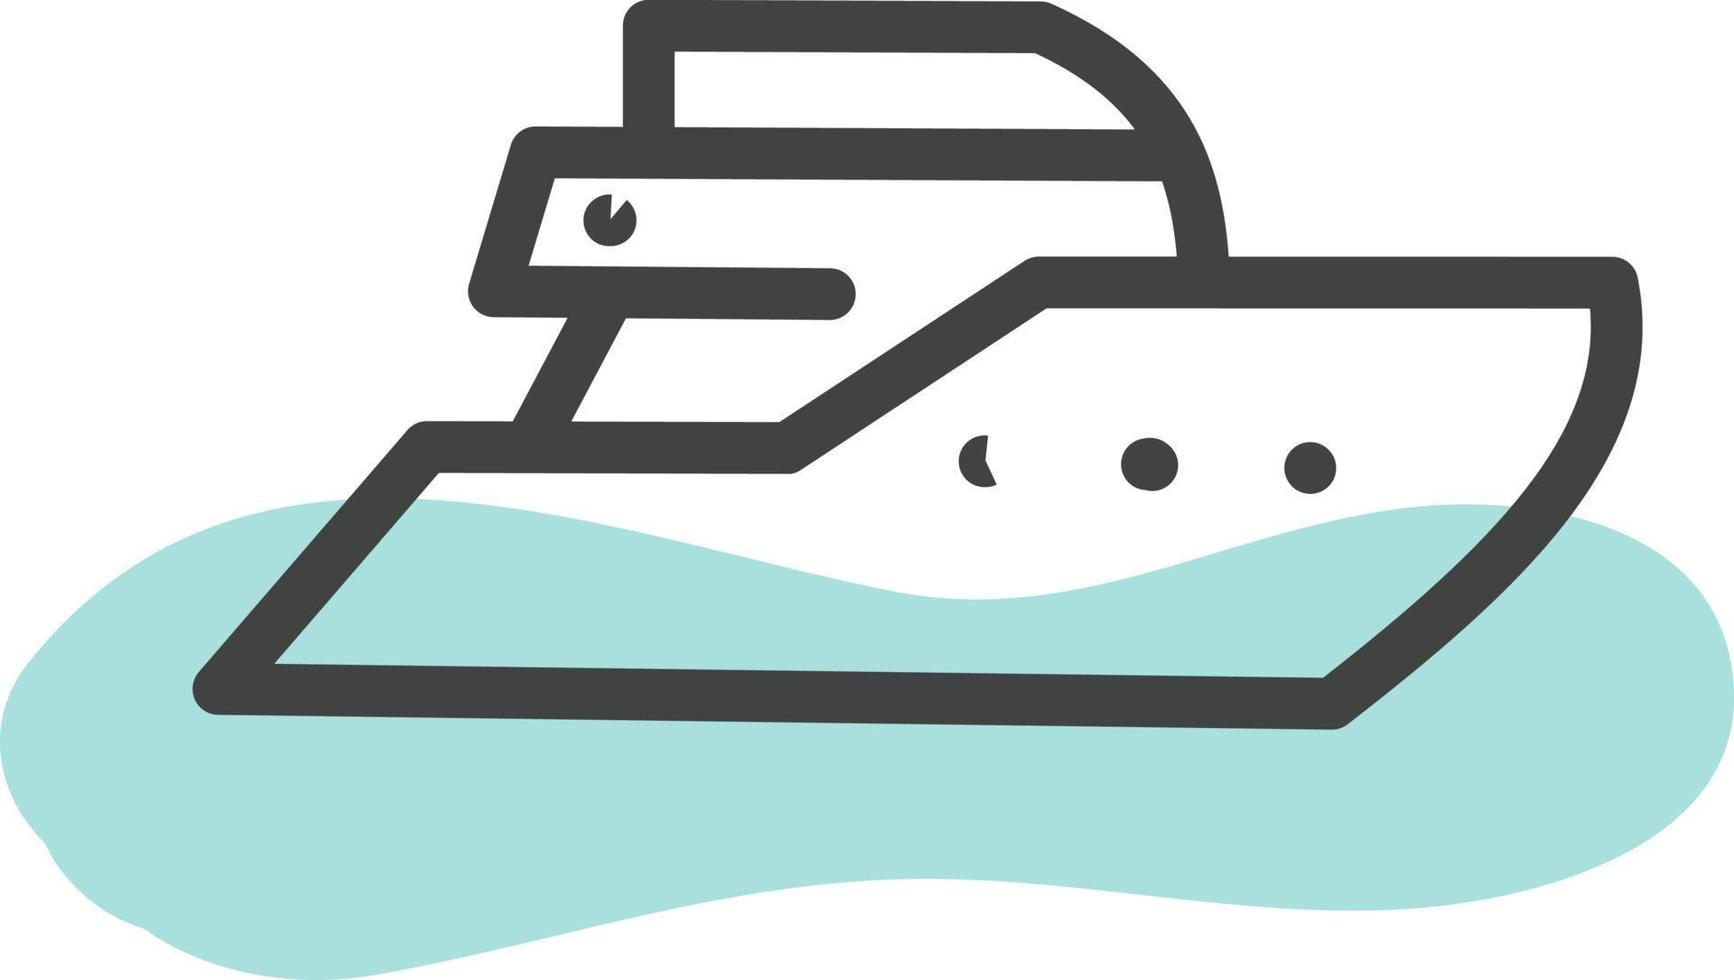 Big cruise ship, illustration, vector, on a white background. vector